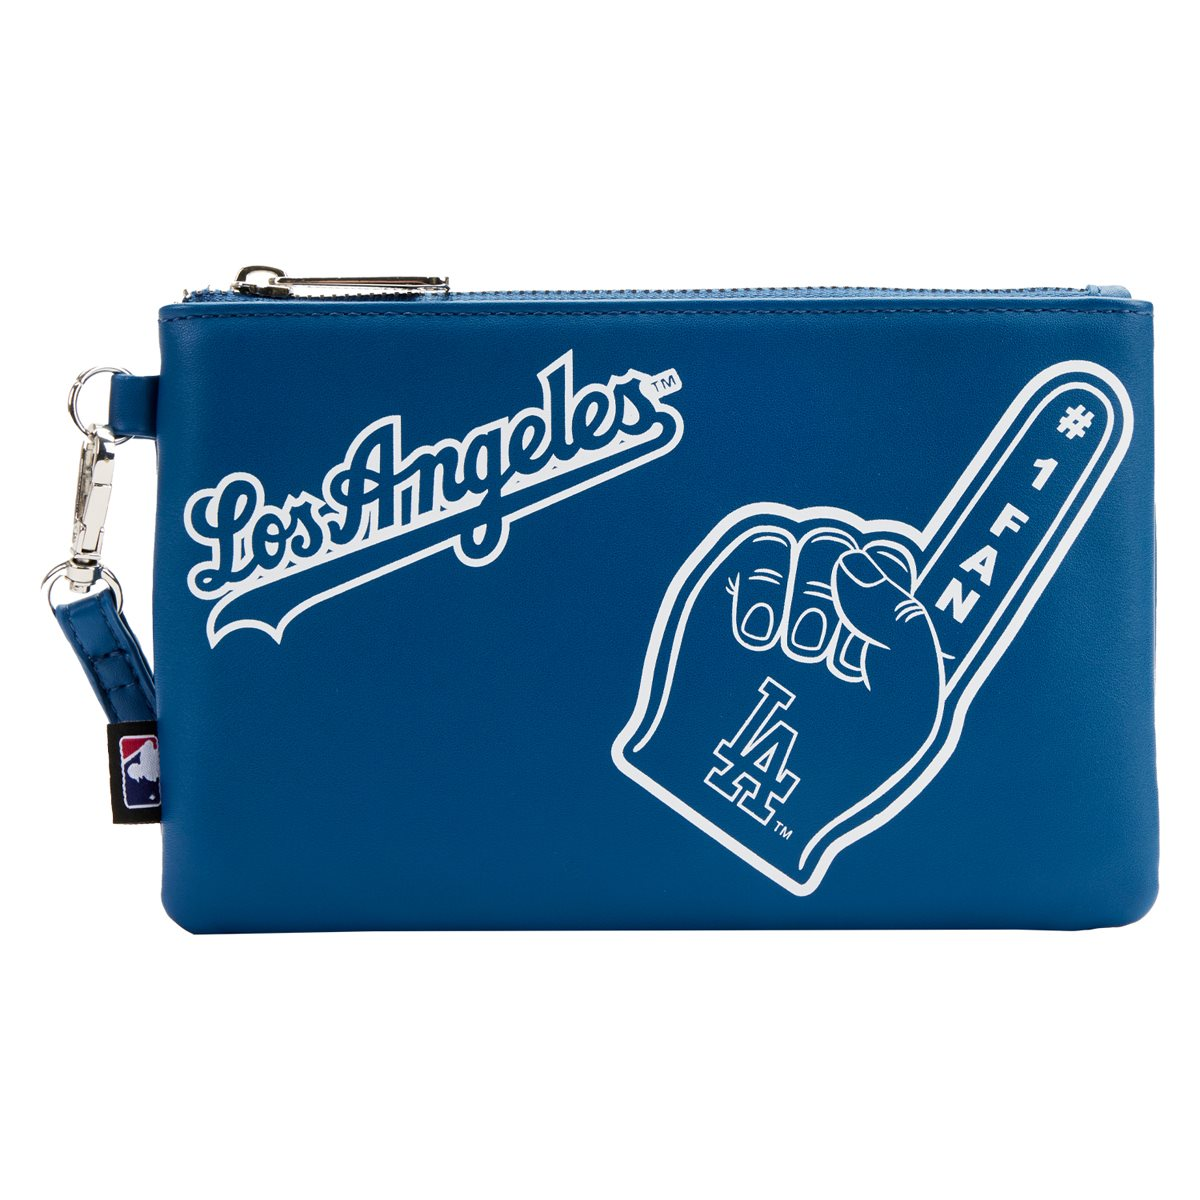 Loungefly New York Yankees Stadium Crossbody Bag with Pouch